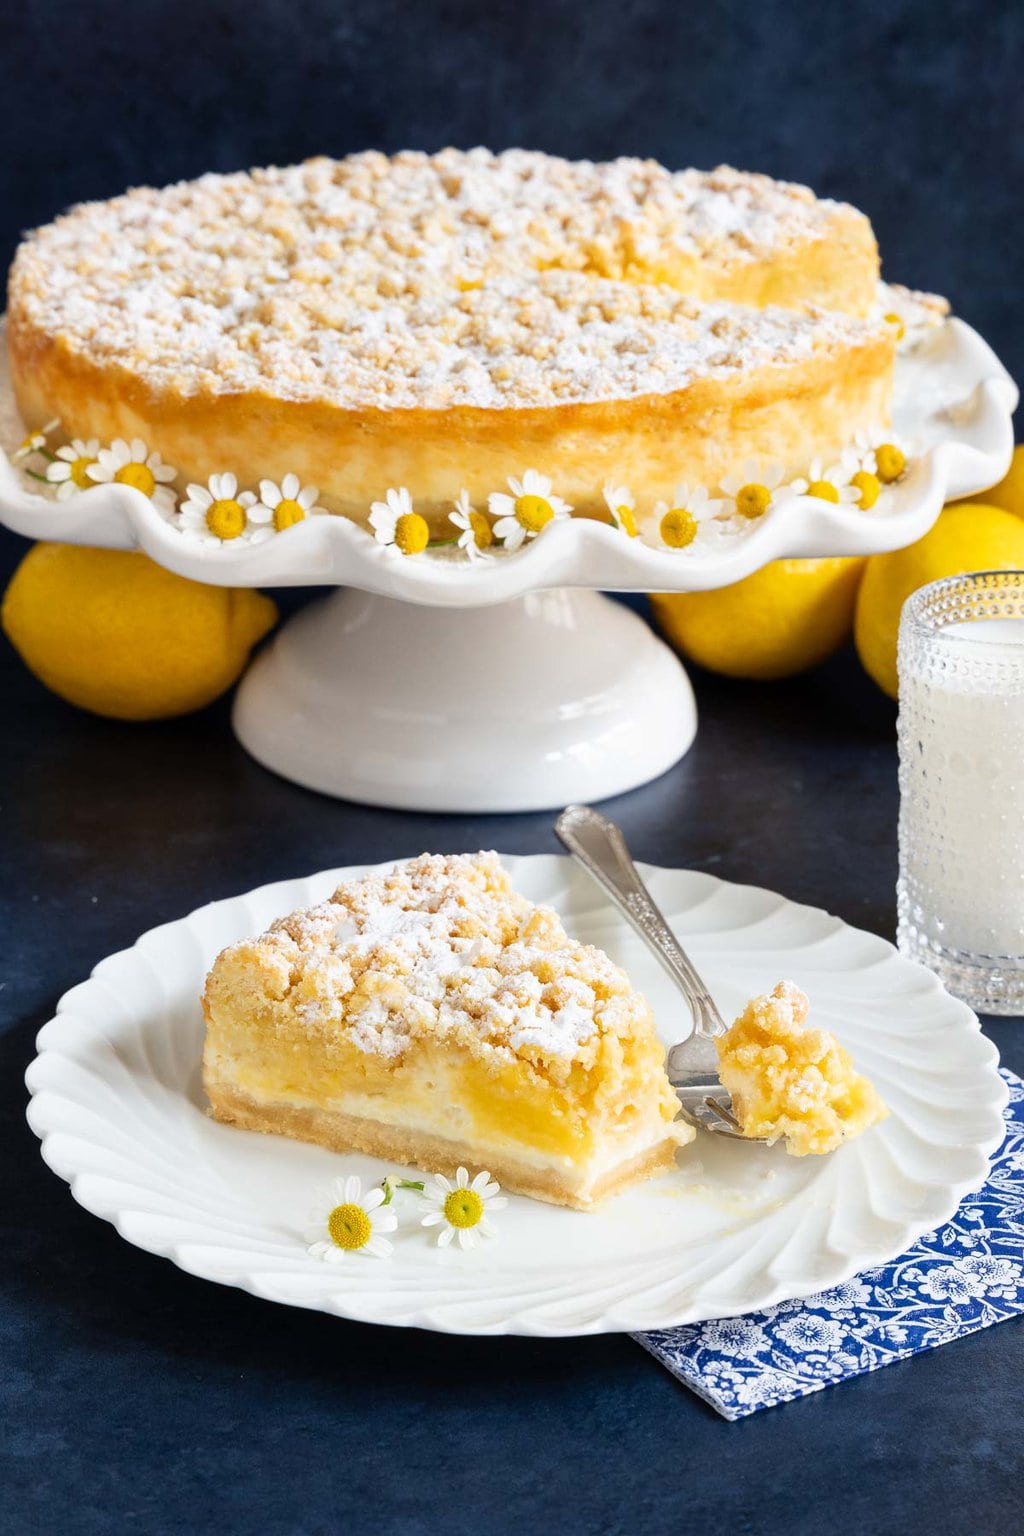 Vertical photo of a Italian Lemon Curd Ricotta Crumb Cake on a white pedestal stand with a slice of the cake on an individual serving plate in the foreground.